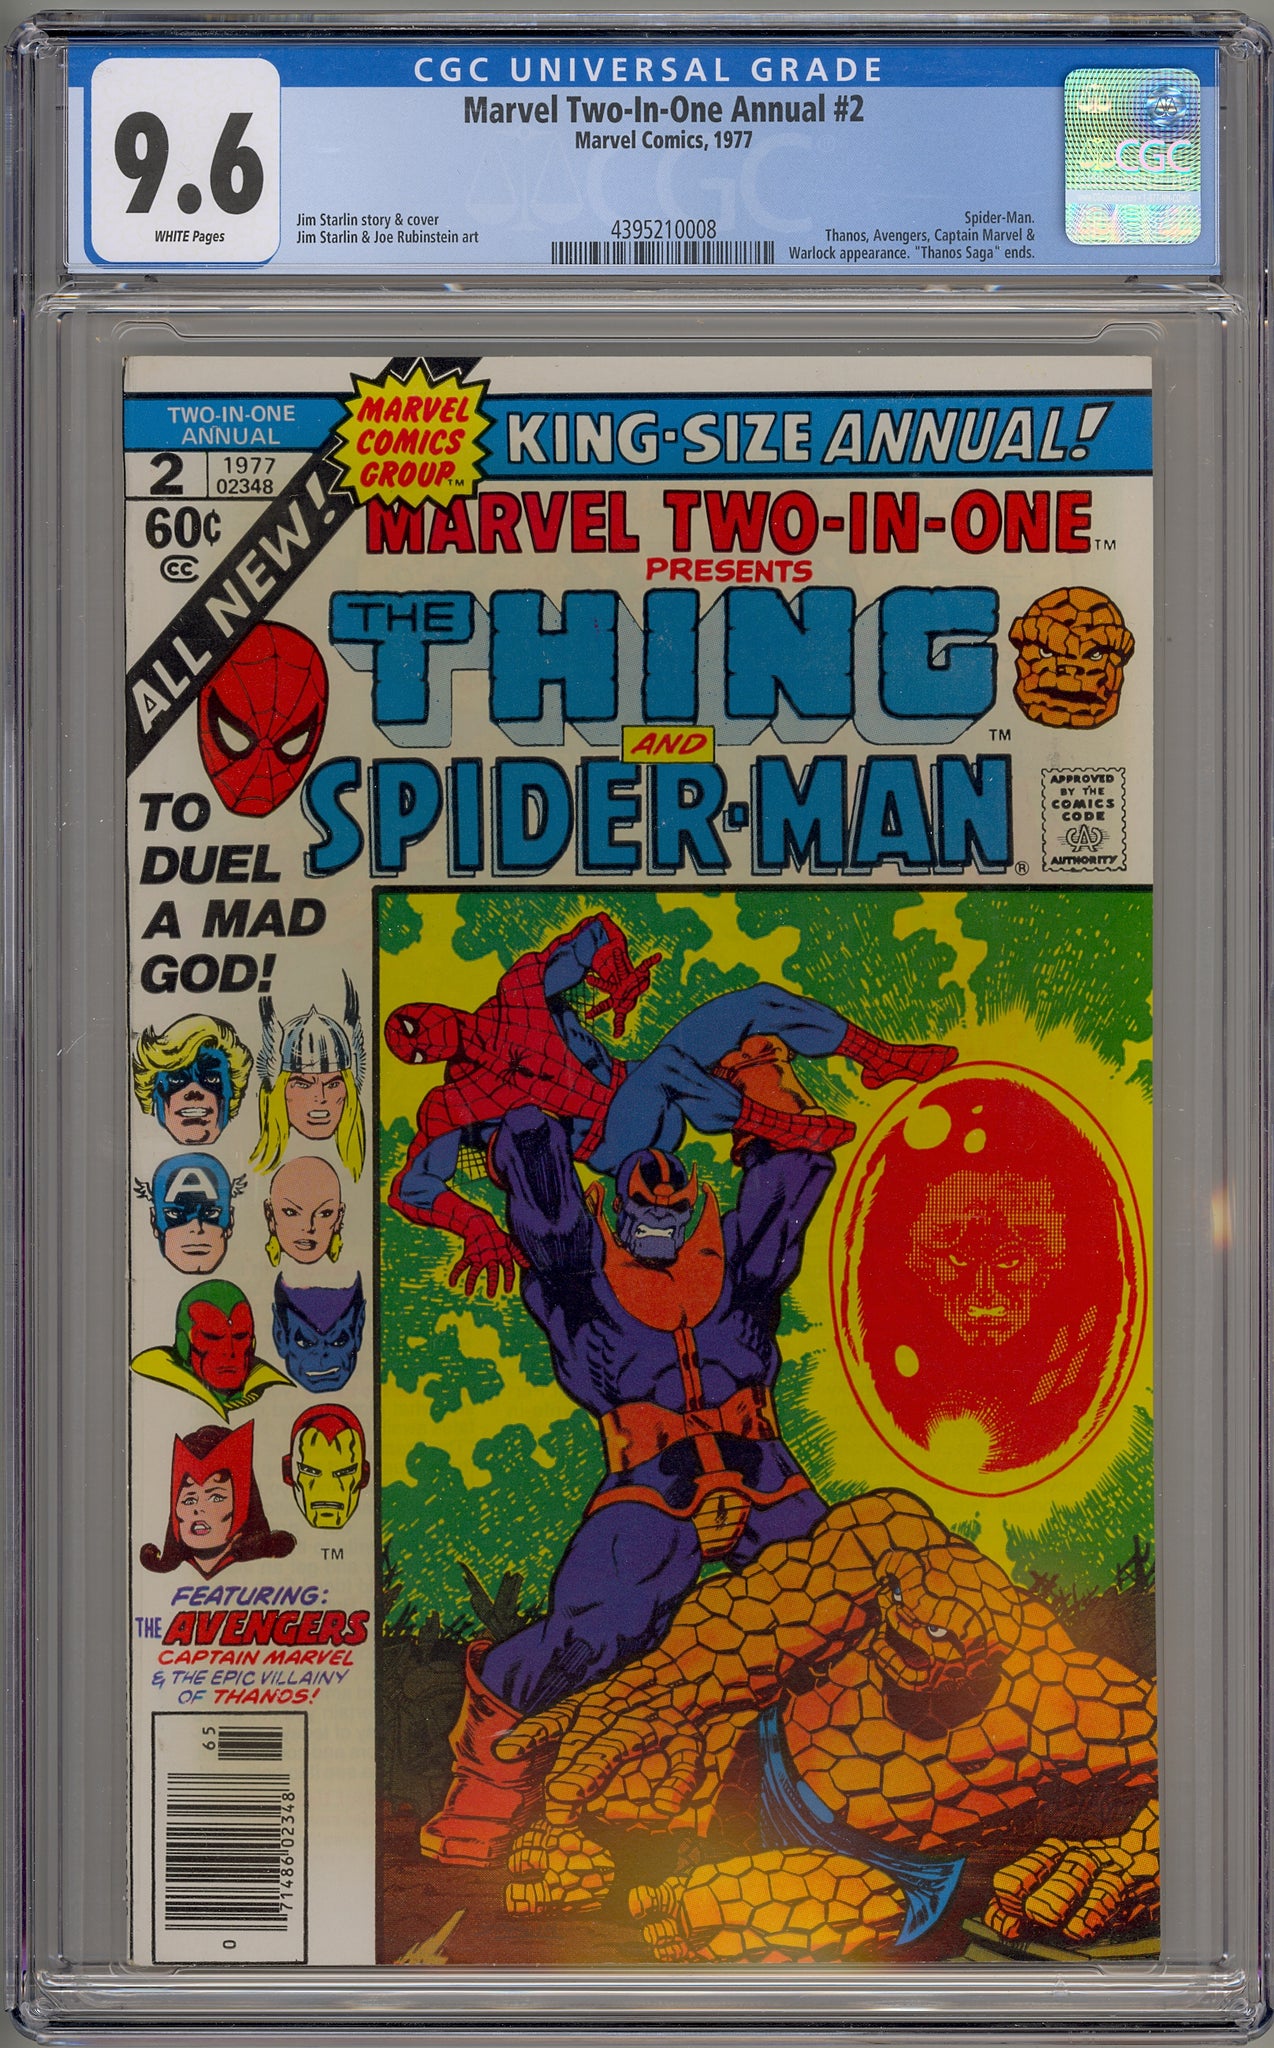 Marvel Two-In-One Annual #2 (1977) Thanos, Avengers, Thing, Spider-Man